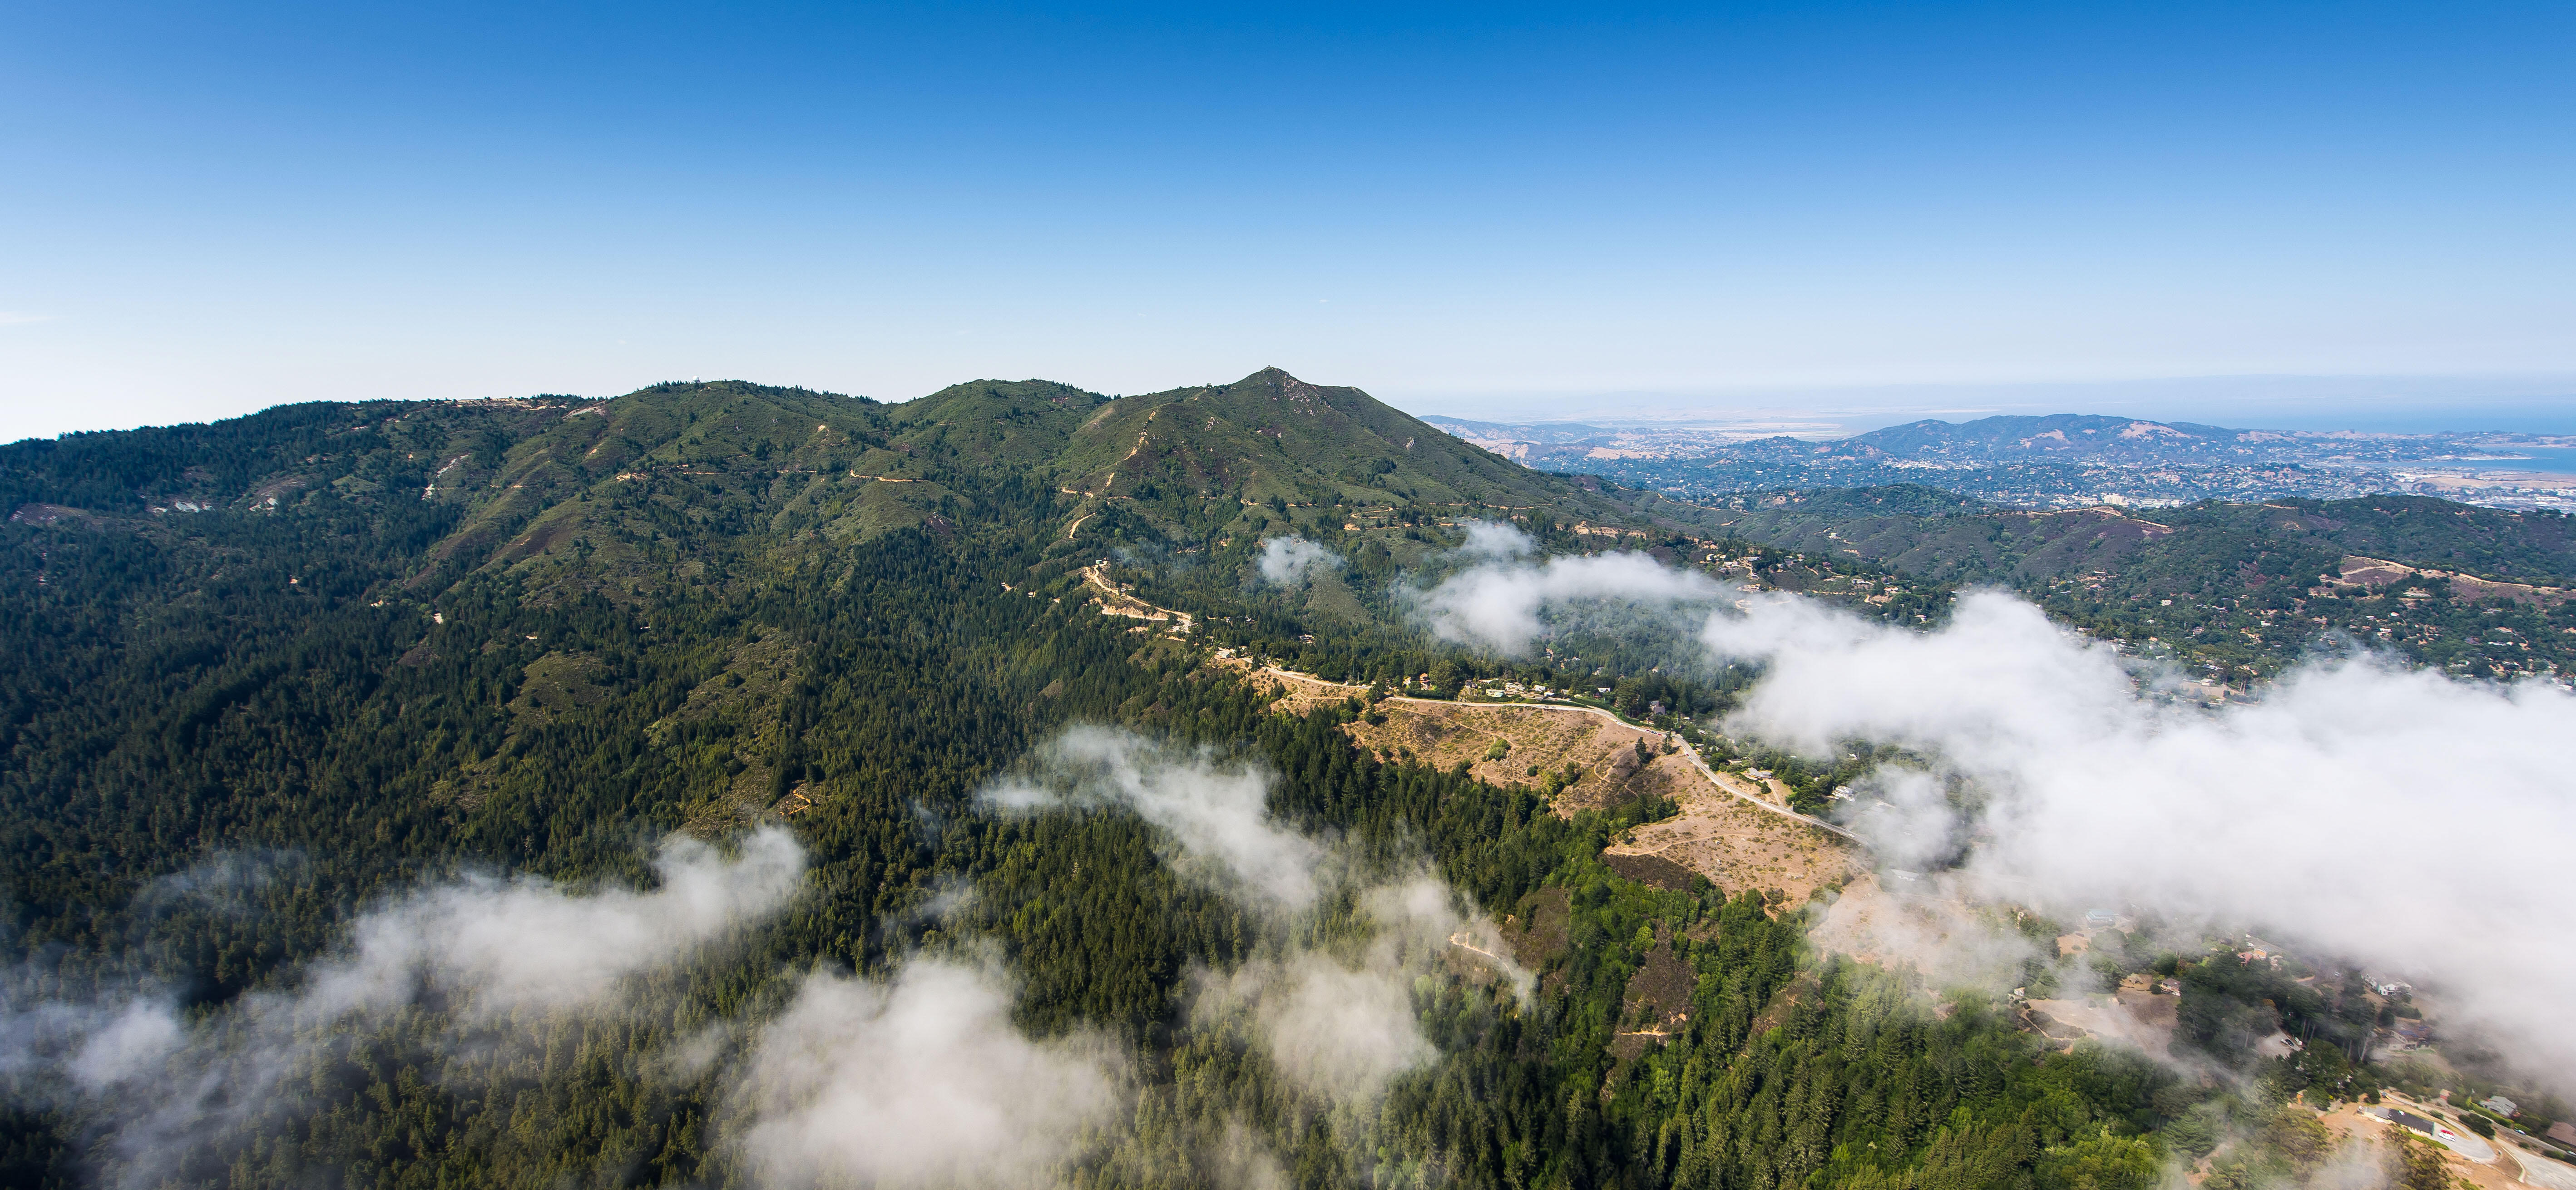 the green outline of Mt. Tamalpais is viewed against a blue sky. The photo is taken at an oblique angle, a trail leads from the bottom right among some white patches of fog.